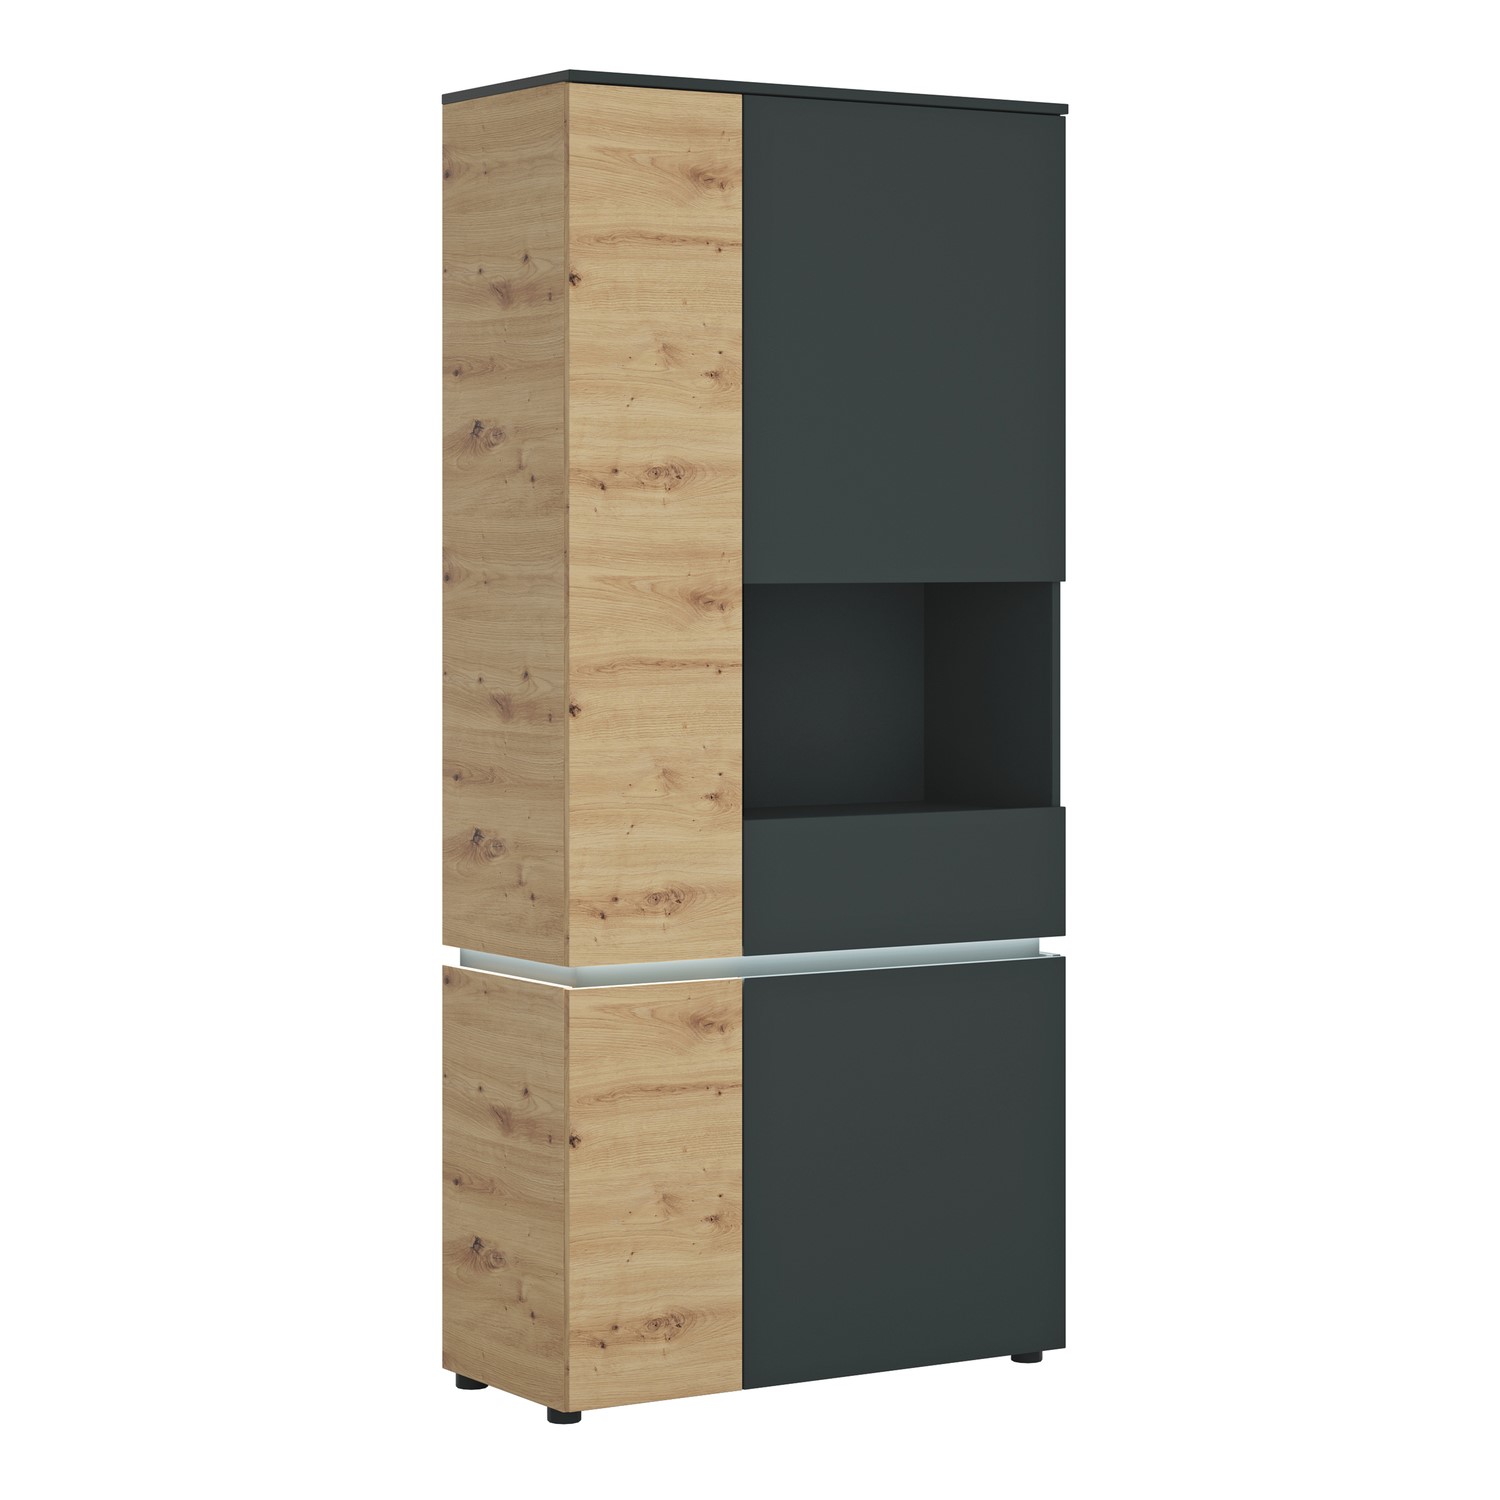 Photo of Tall dark grey and oak 4 door display cabinet with leds - luci